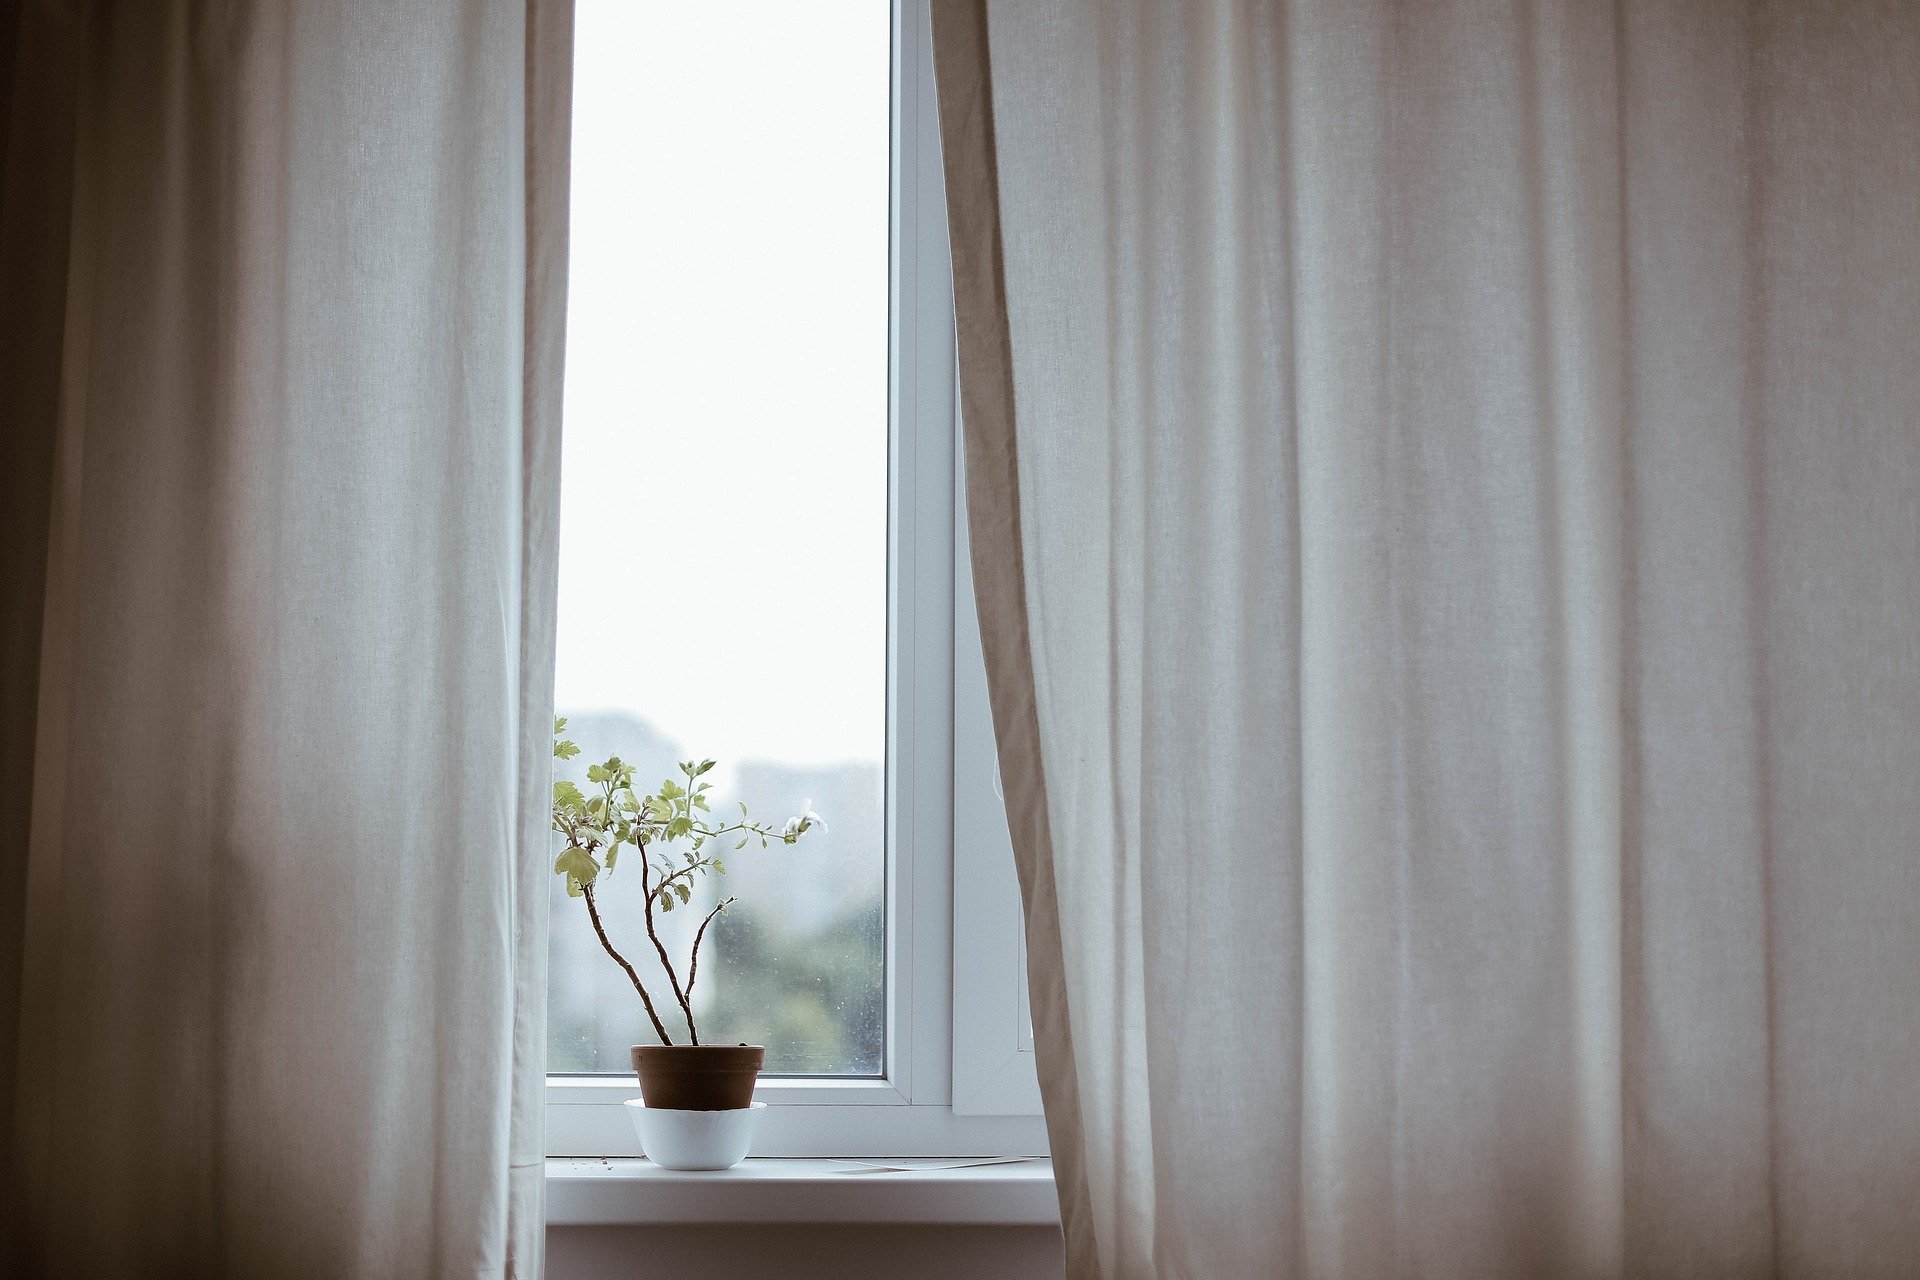 Pot with a plant on a window with white curtains